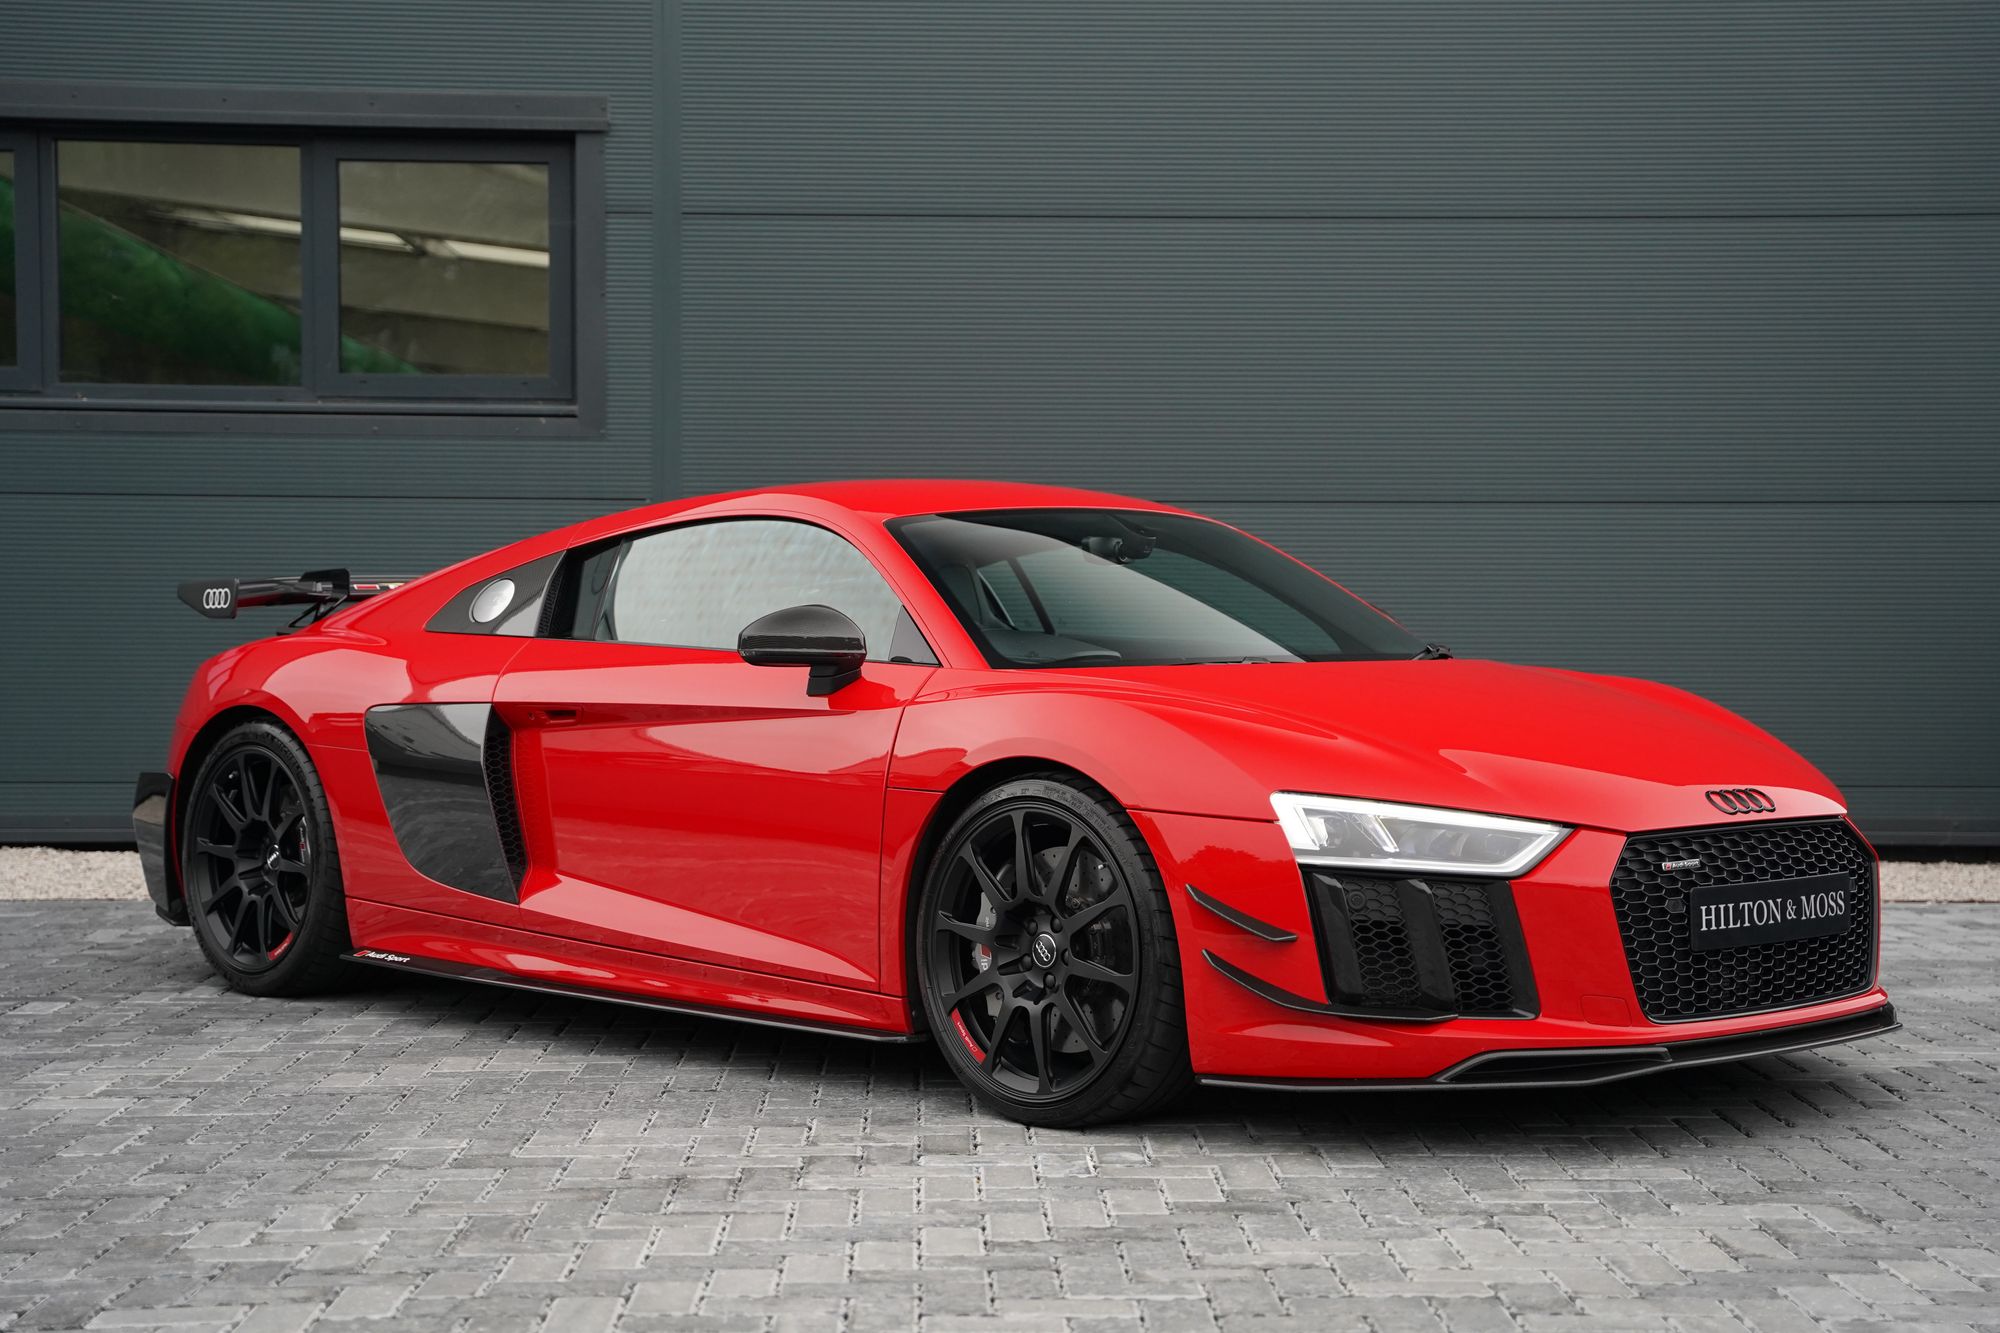 2018 Audi R8 V10 Plus 'Performance Parts' Edition Previously Sold